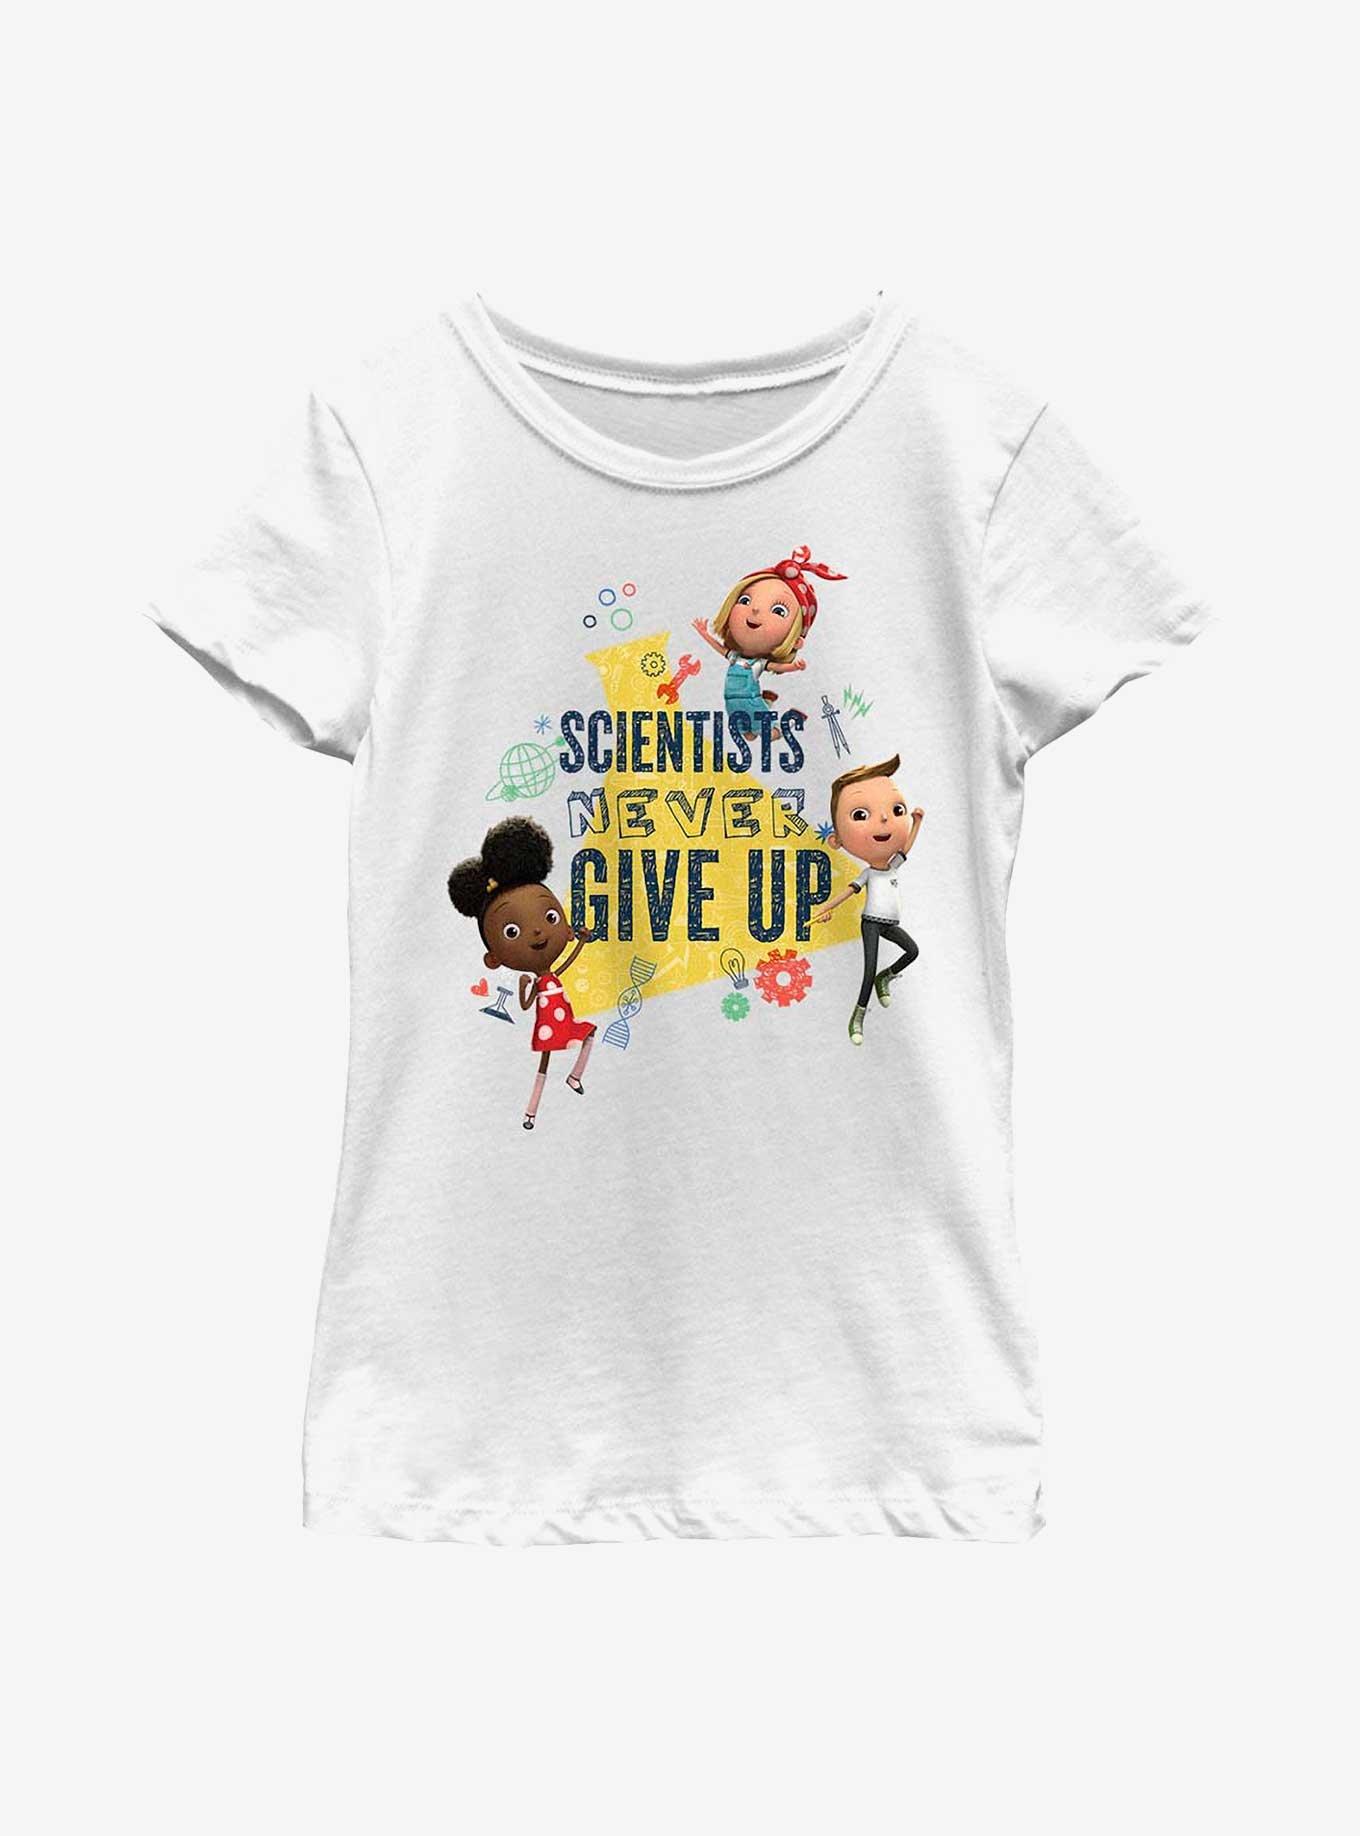 Ada Twist, Scientist Never Give Up Youth Girls T-Shirt, WHITE, hi-res